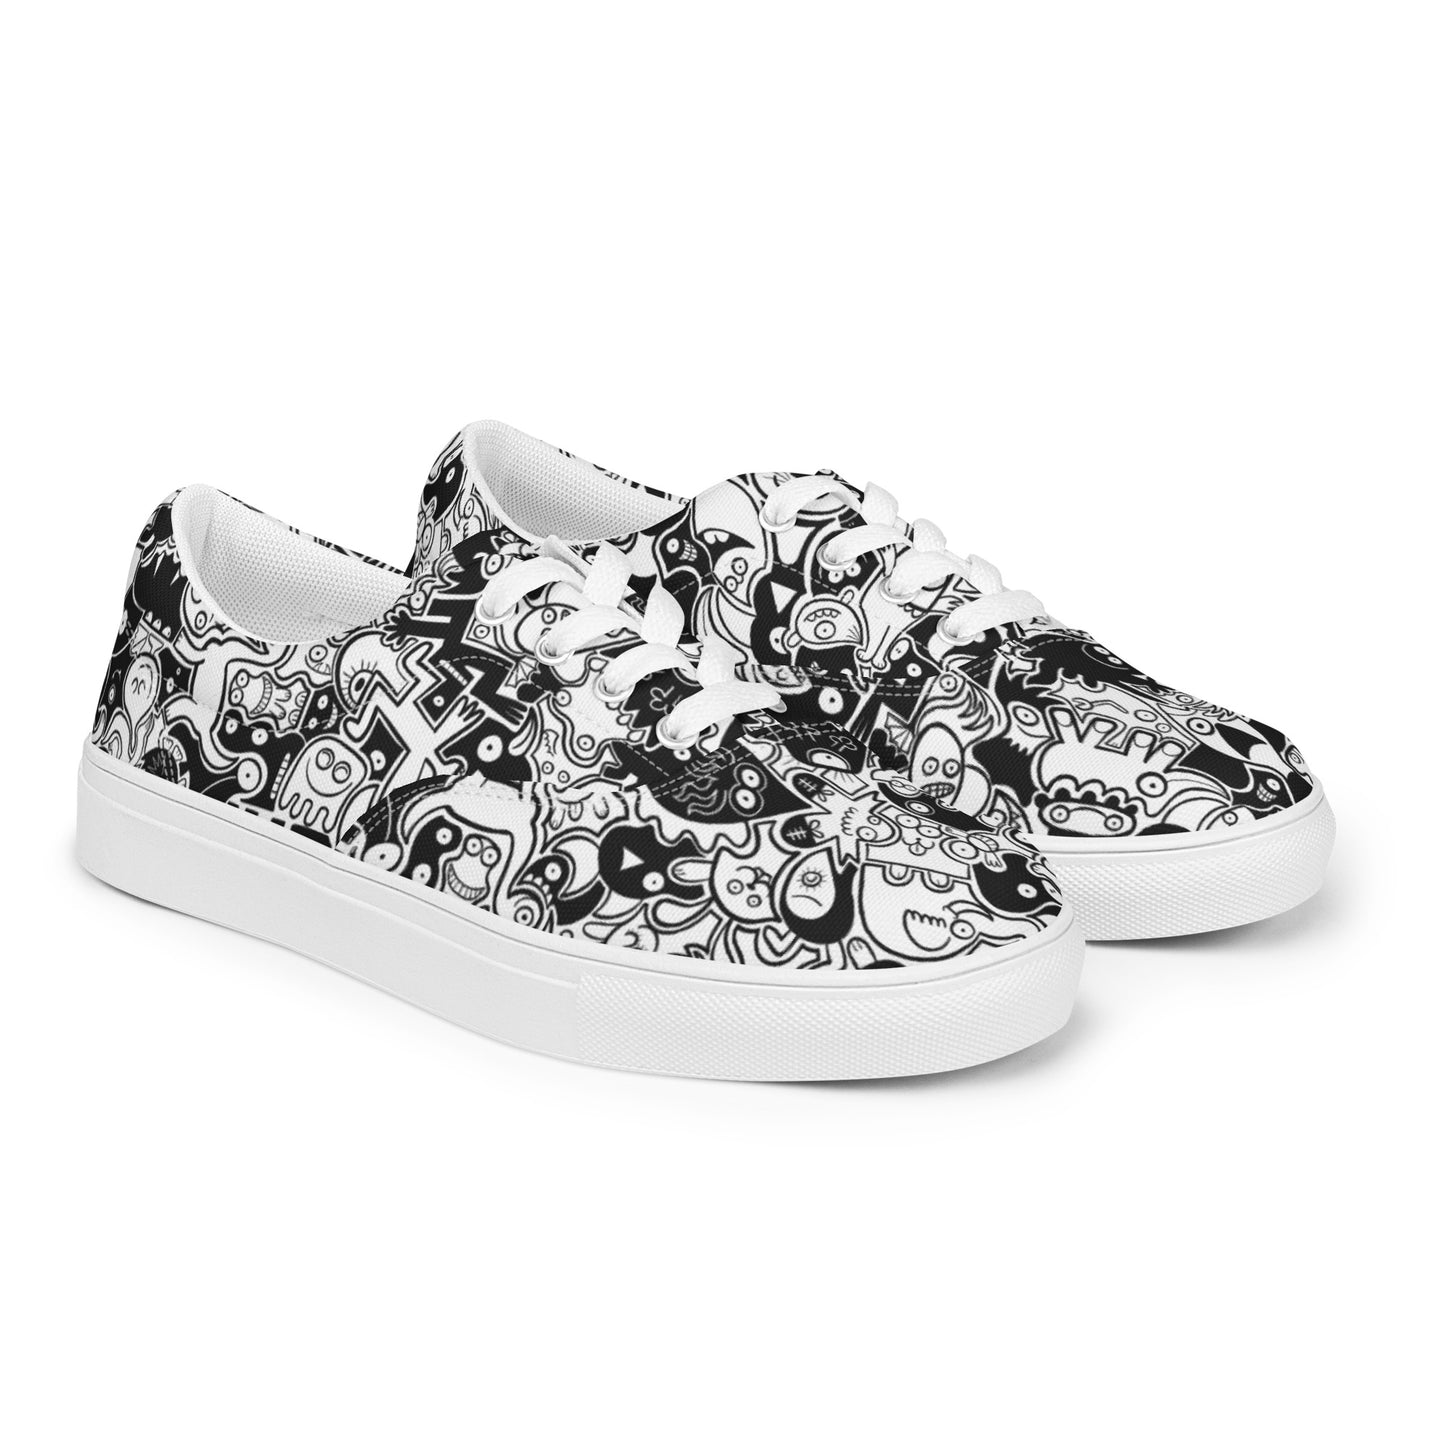 Joyful crowd of black and white doodle creatures Women’s lace-up canvas shoes. Overview